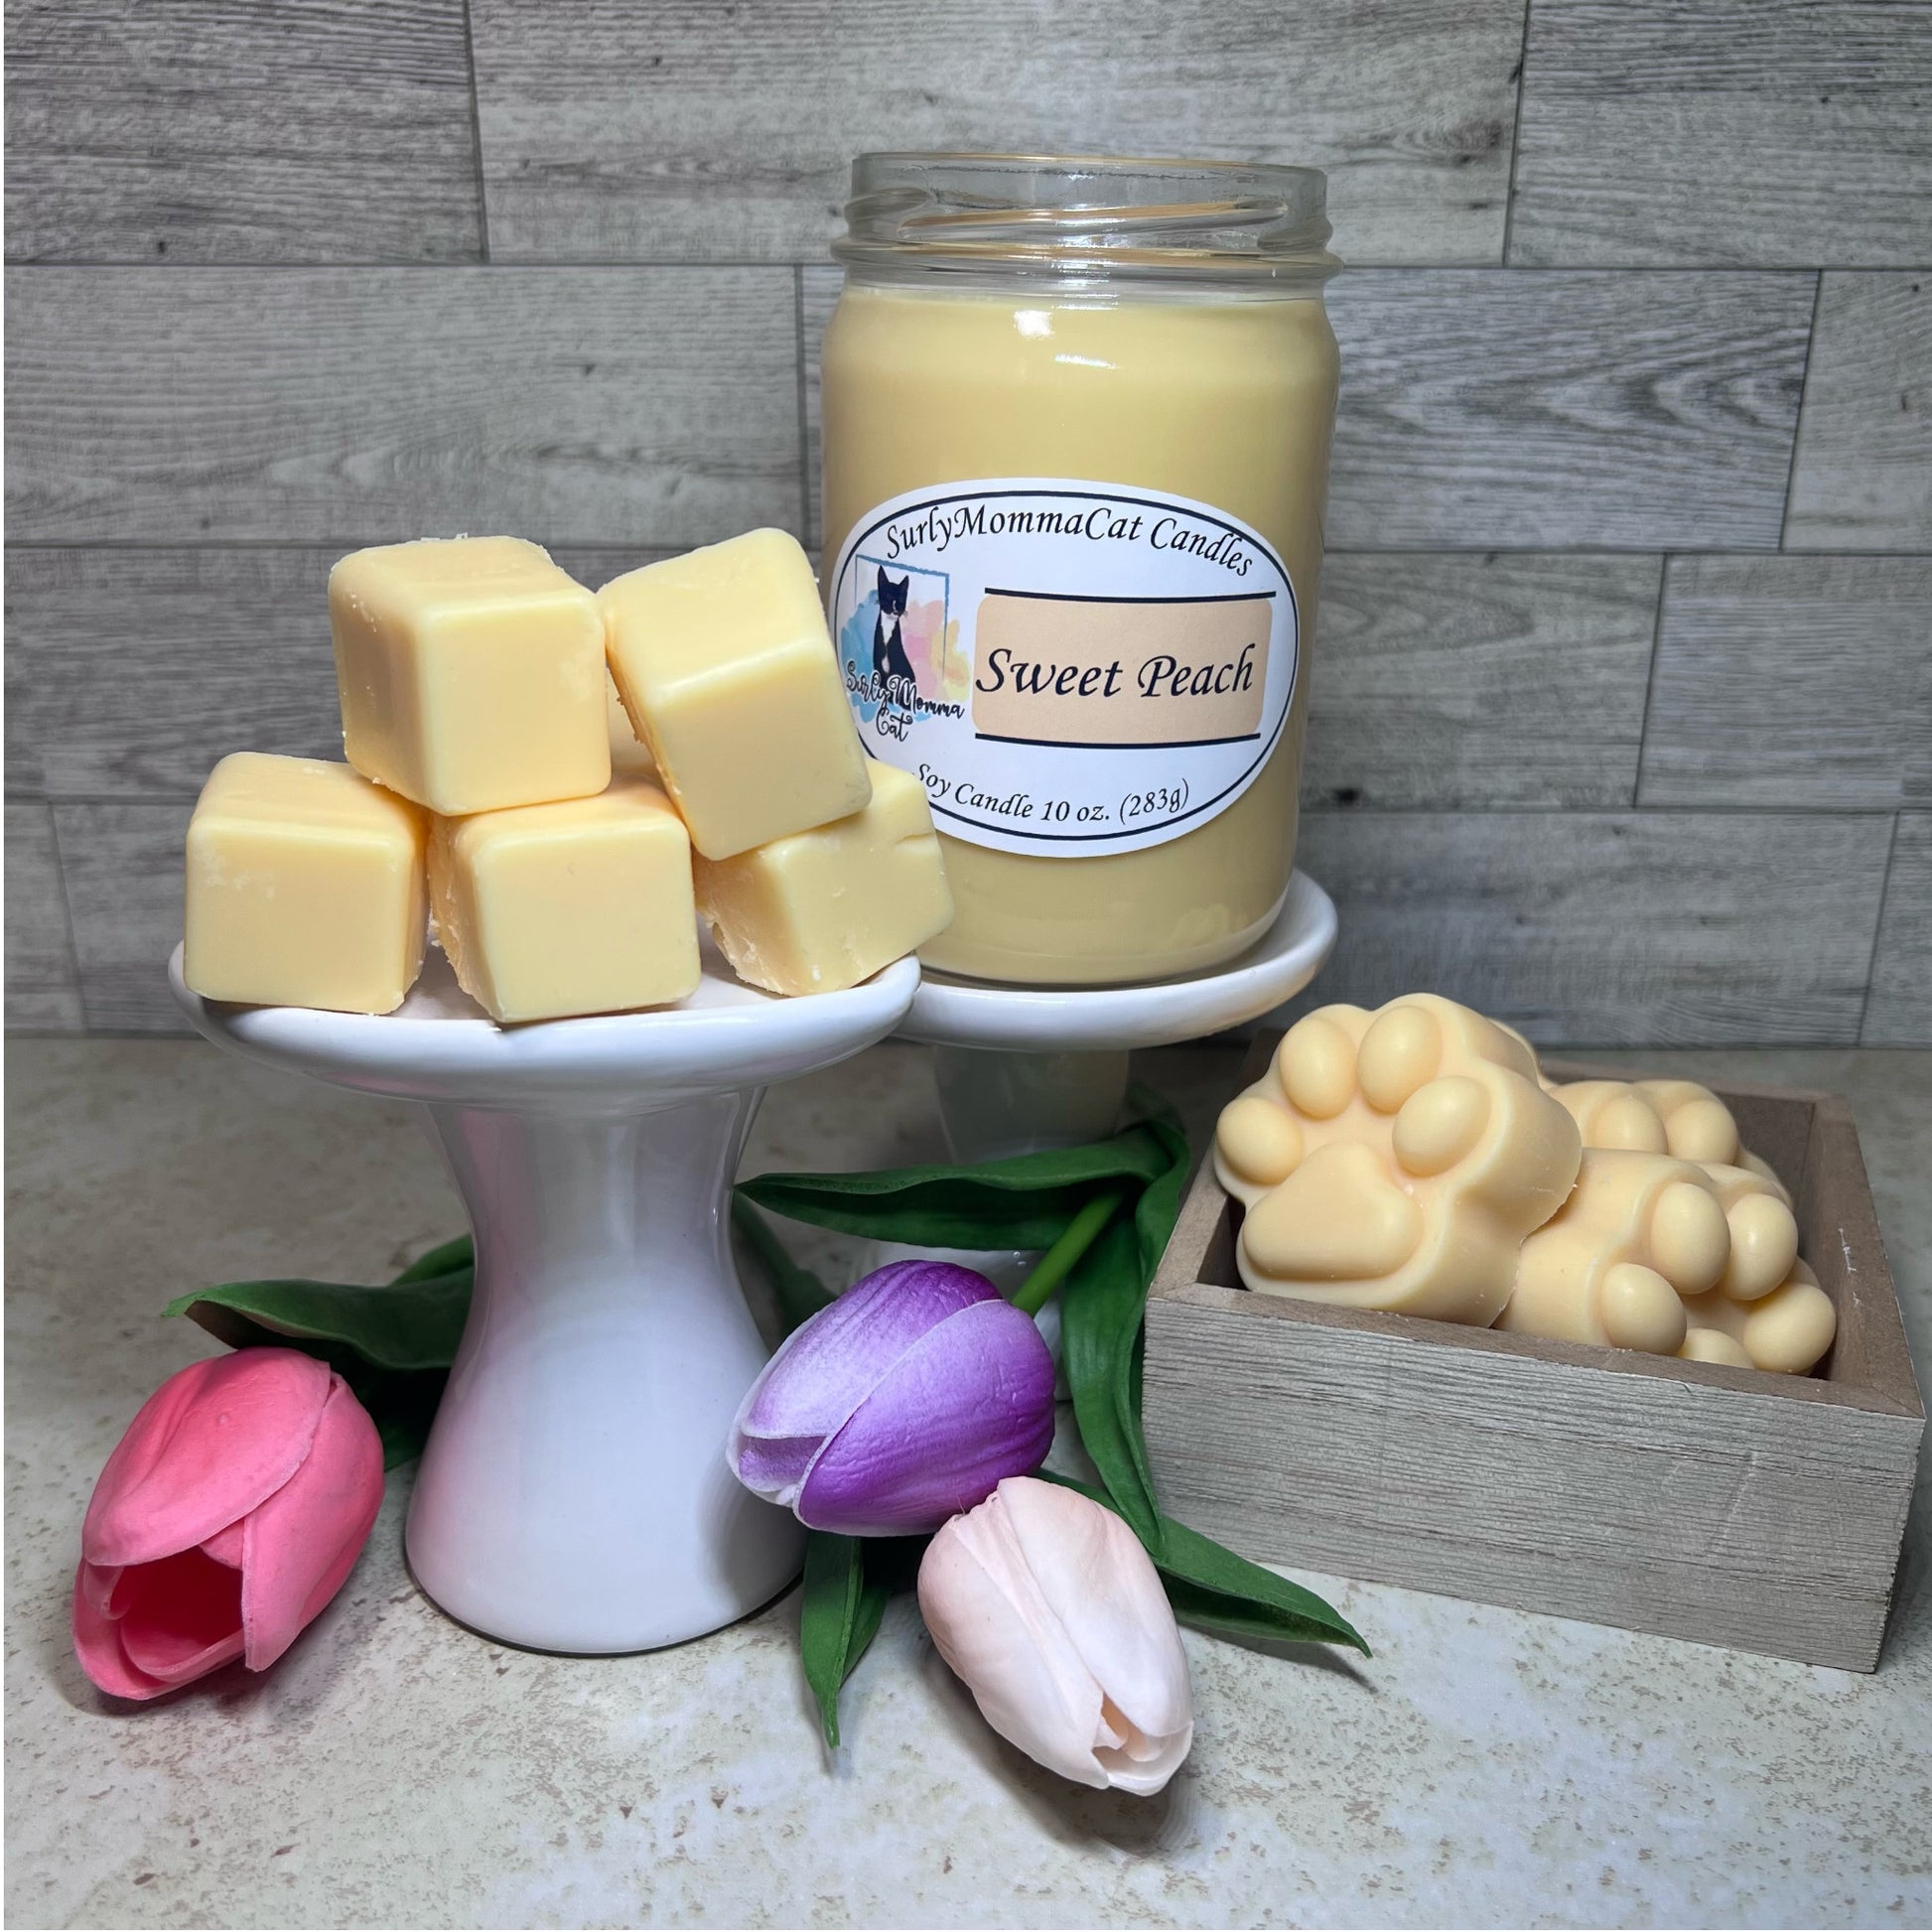 Sweet Peach Candles and Wax Melts – SurlyMommaCat Candles